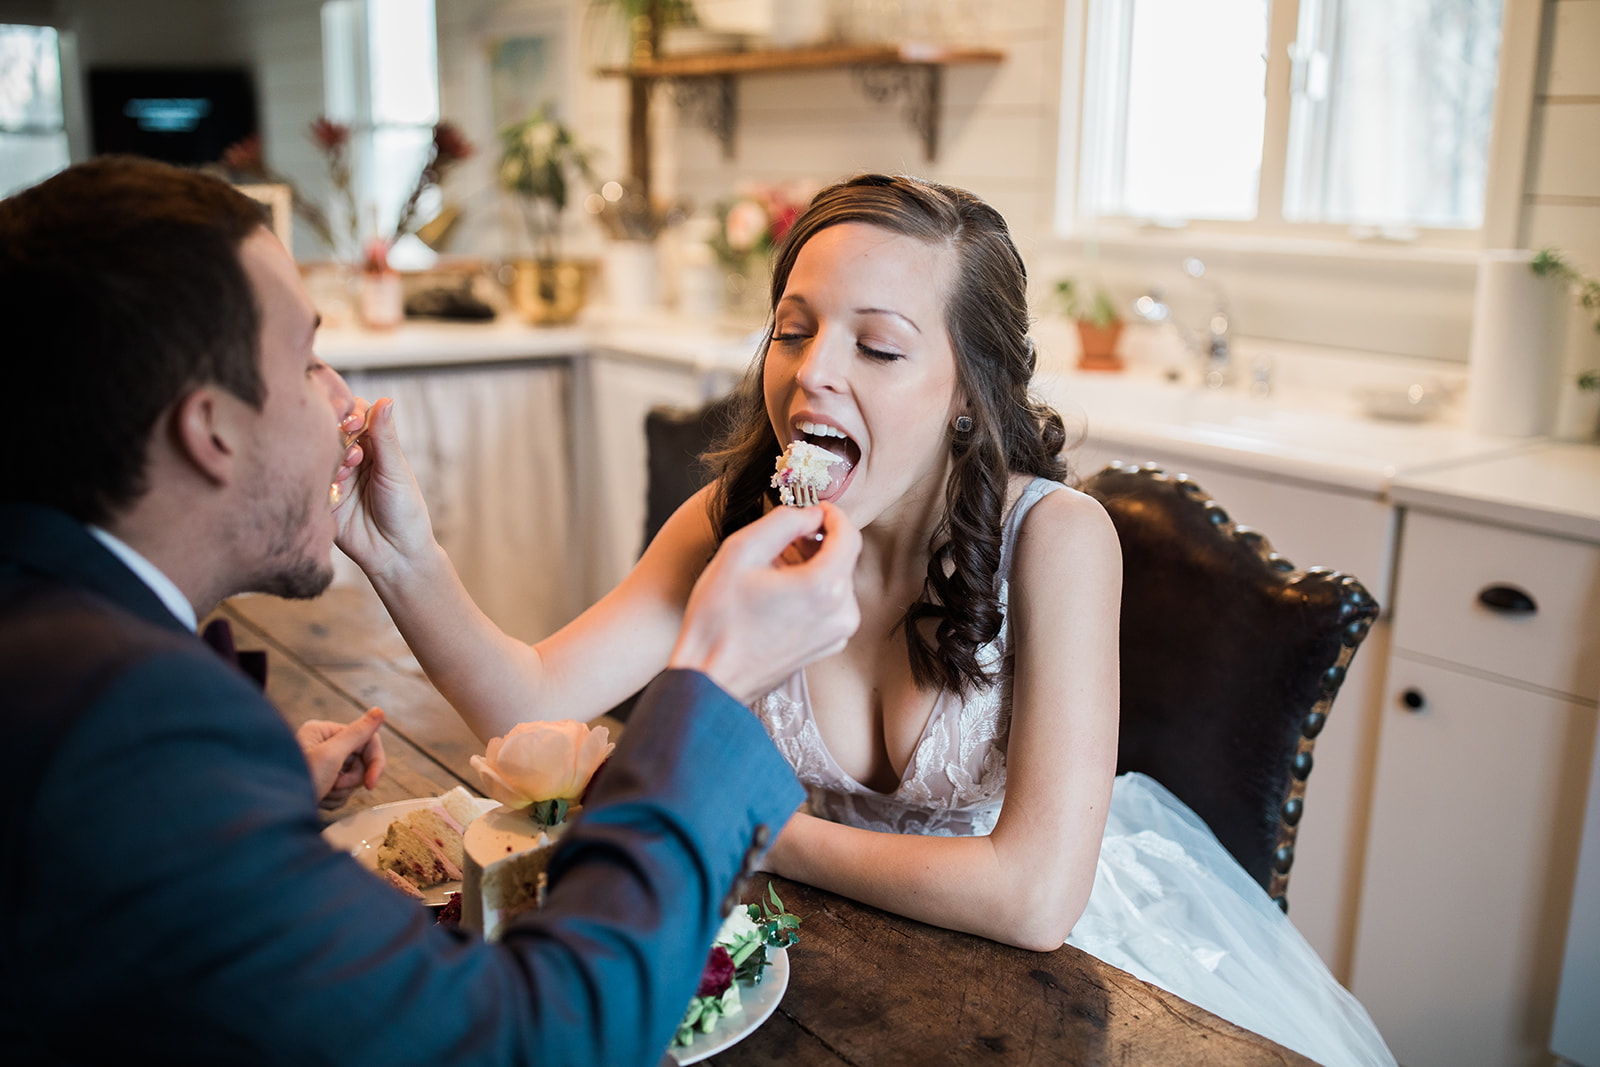 bride and groom cut wedding cake before elopement ceremony